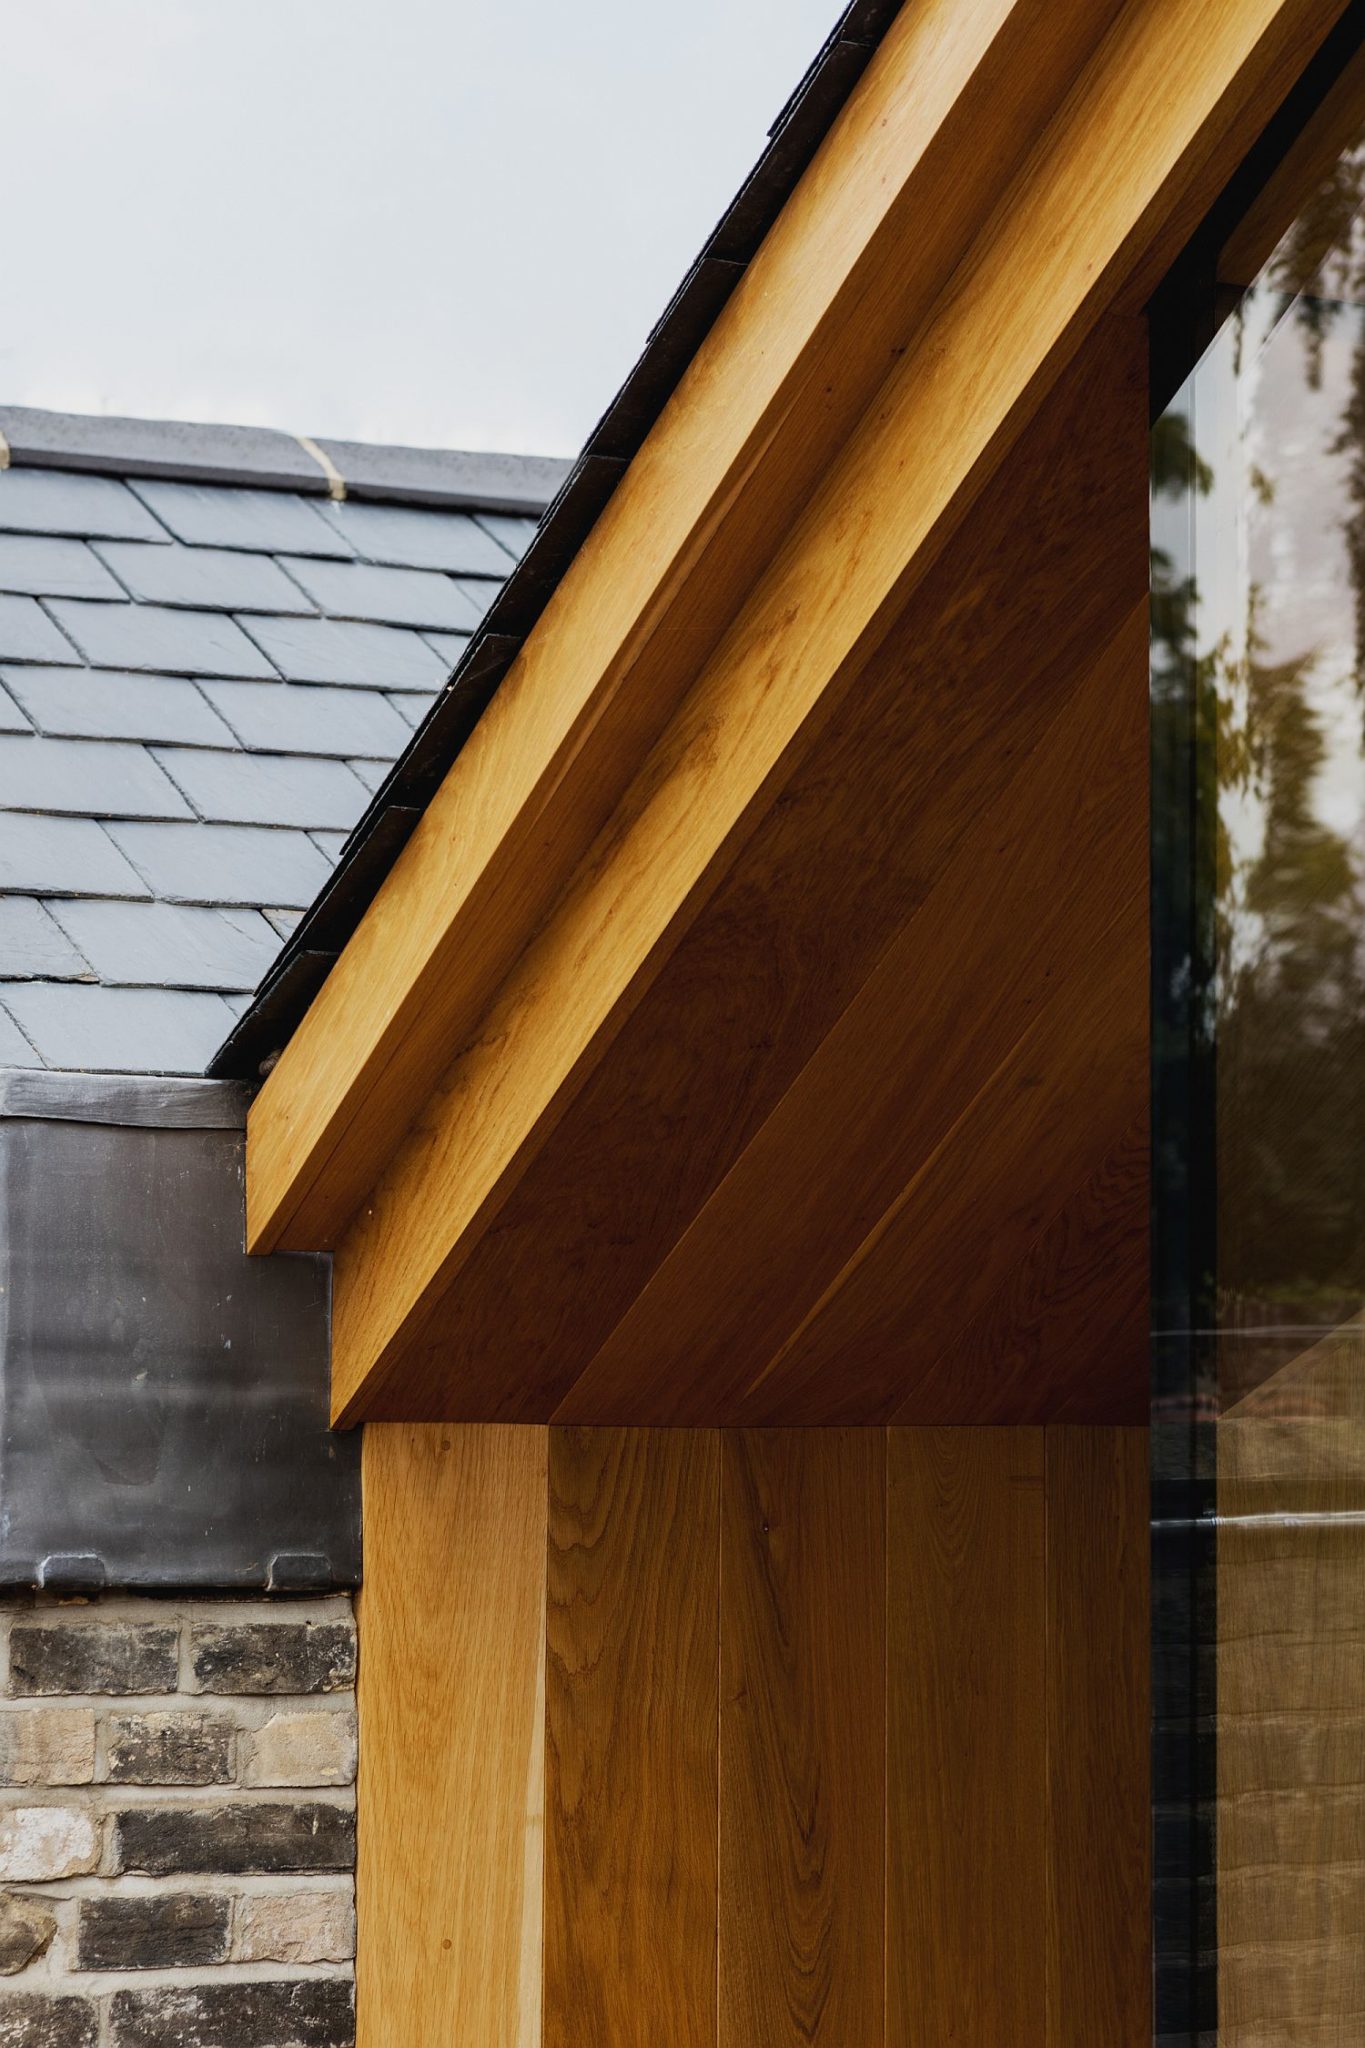 Lovely use of oak creates a visually light and contemporary extension